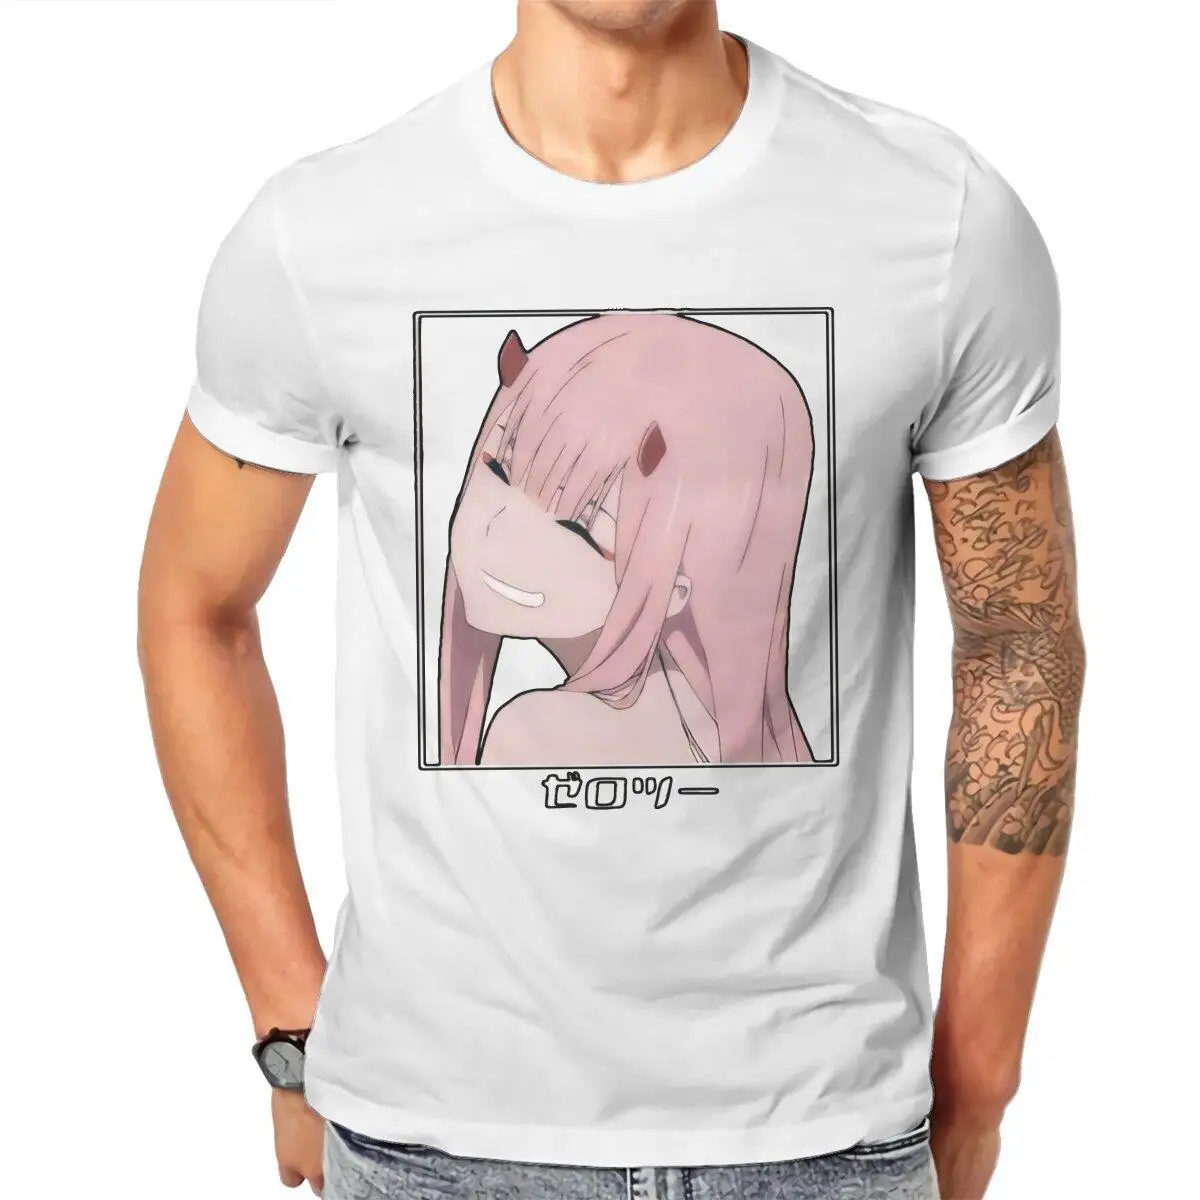 Zero Two Sweet Girl  T Shirts for Men 100% Cotton Vintage T-Shirt Round Collar Darling In The Franxx Anime Tees Clothes Graphic